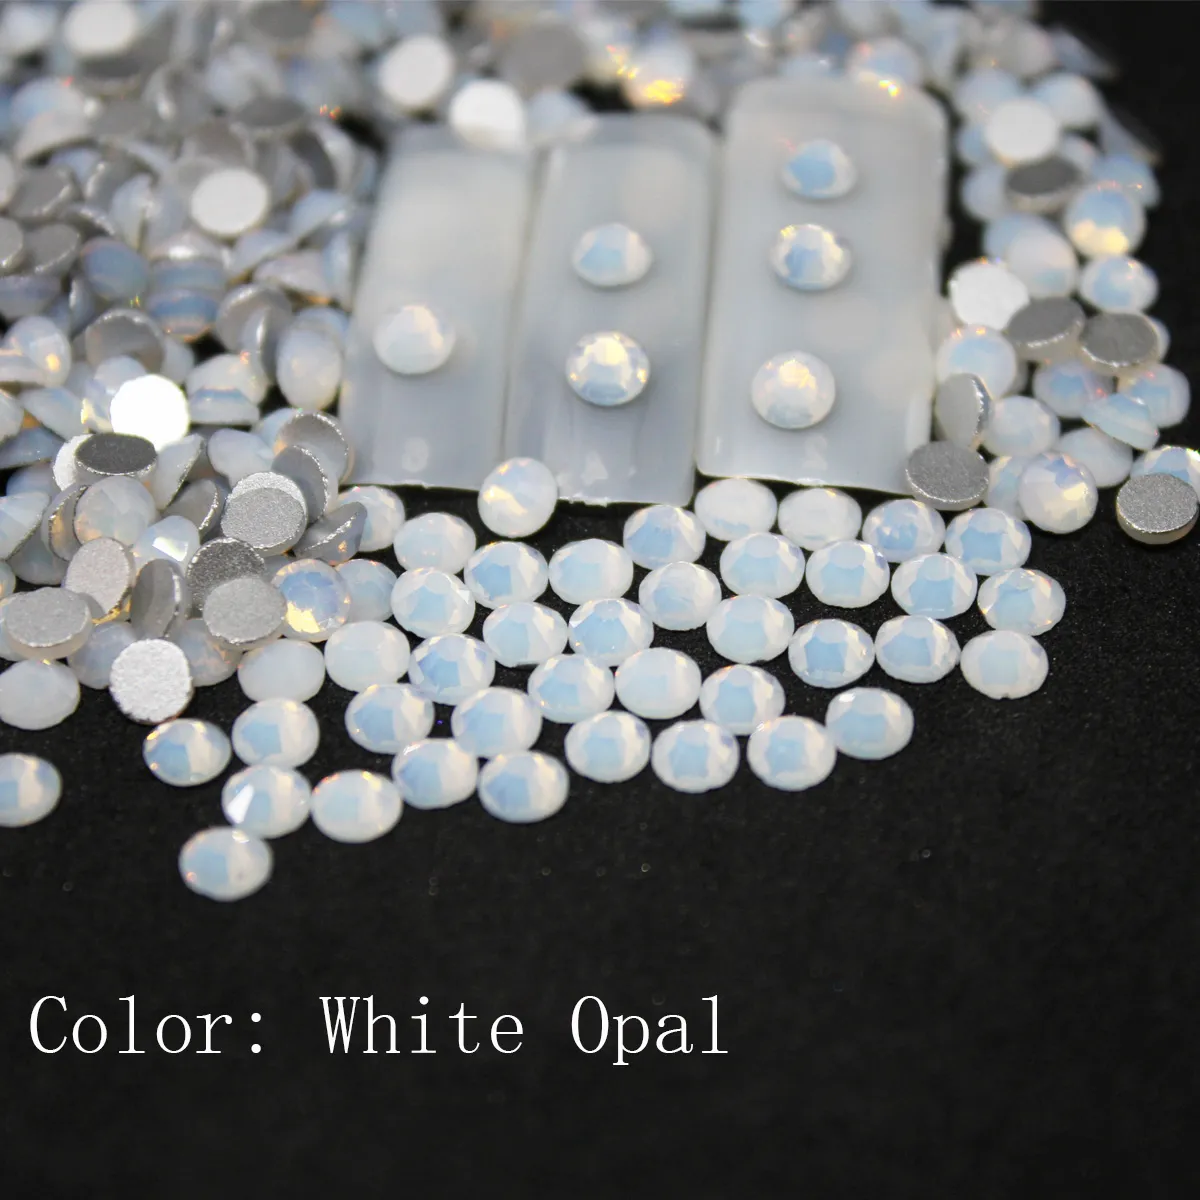 White Opal Rhinestones Back Flat Round Nail Art Decorations And Stones Non Hotfix Rhinestones Crystals for DIY Glass